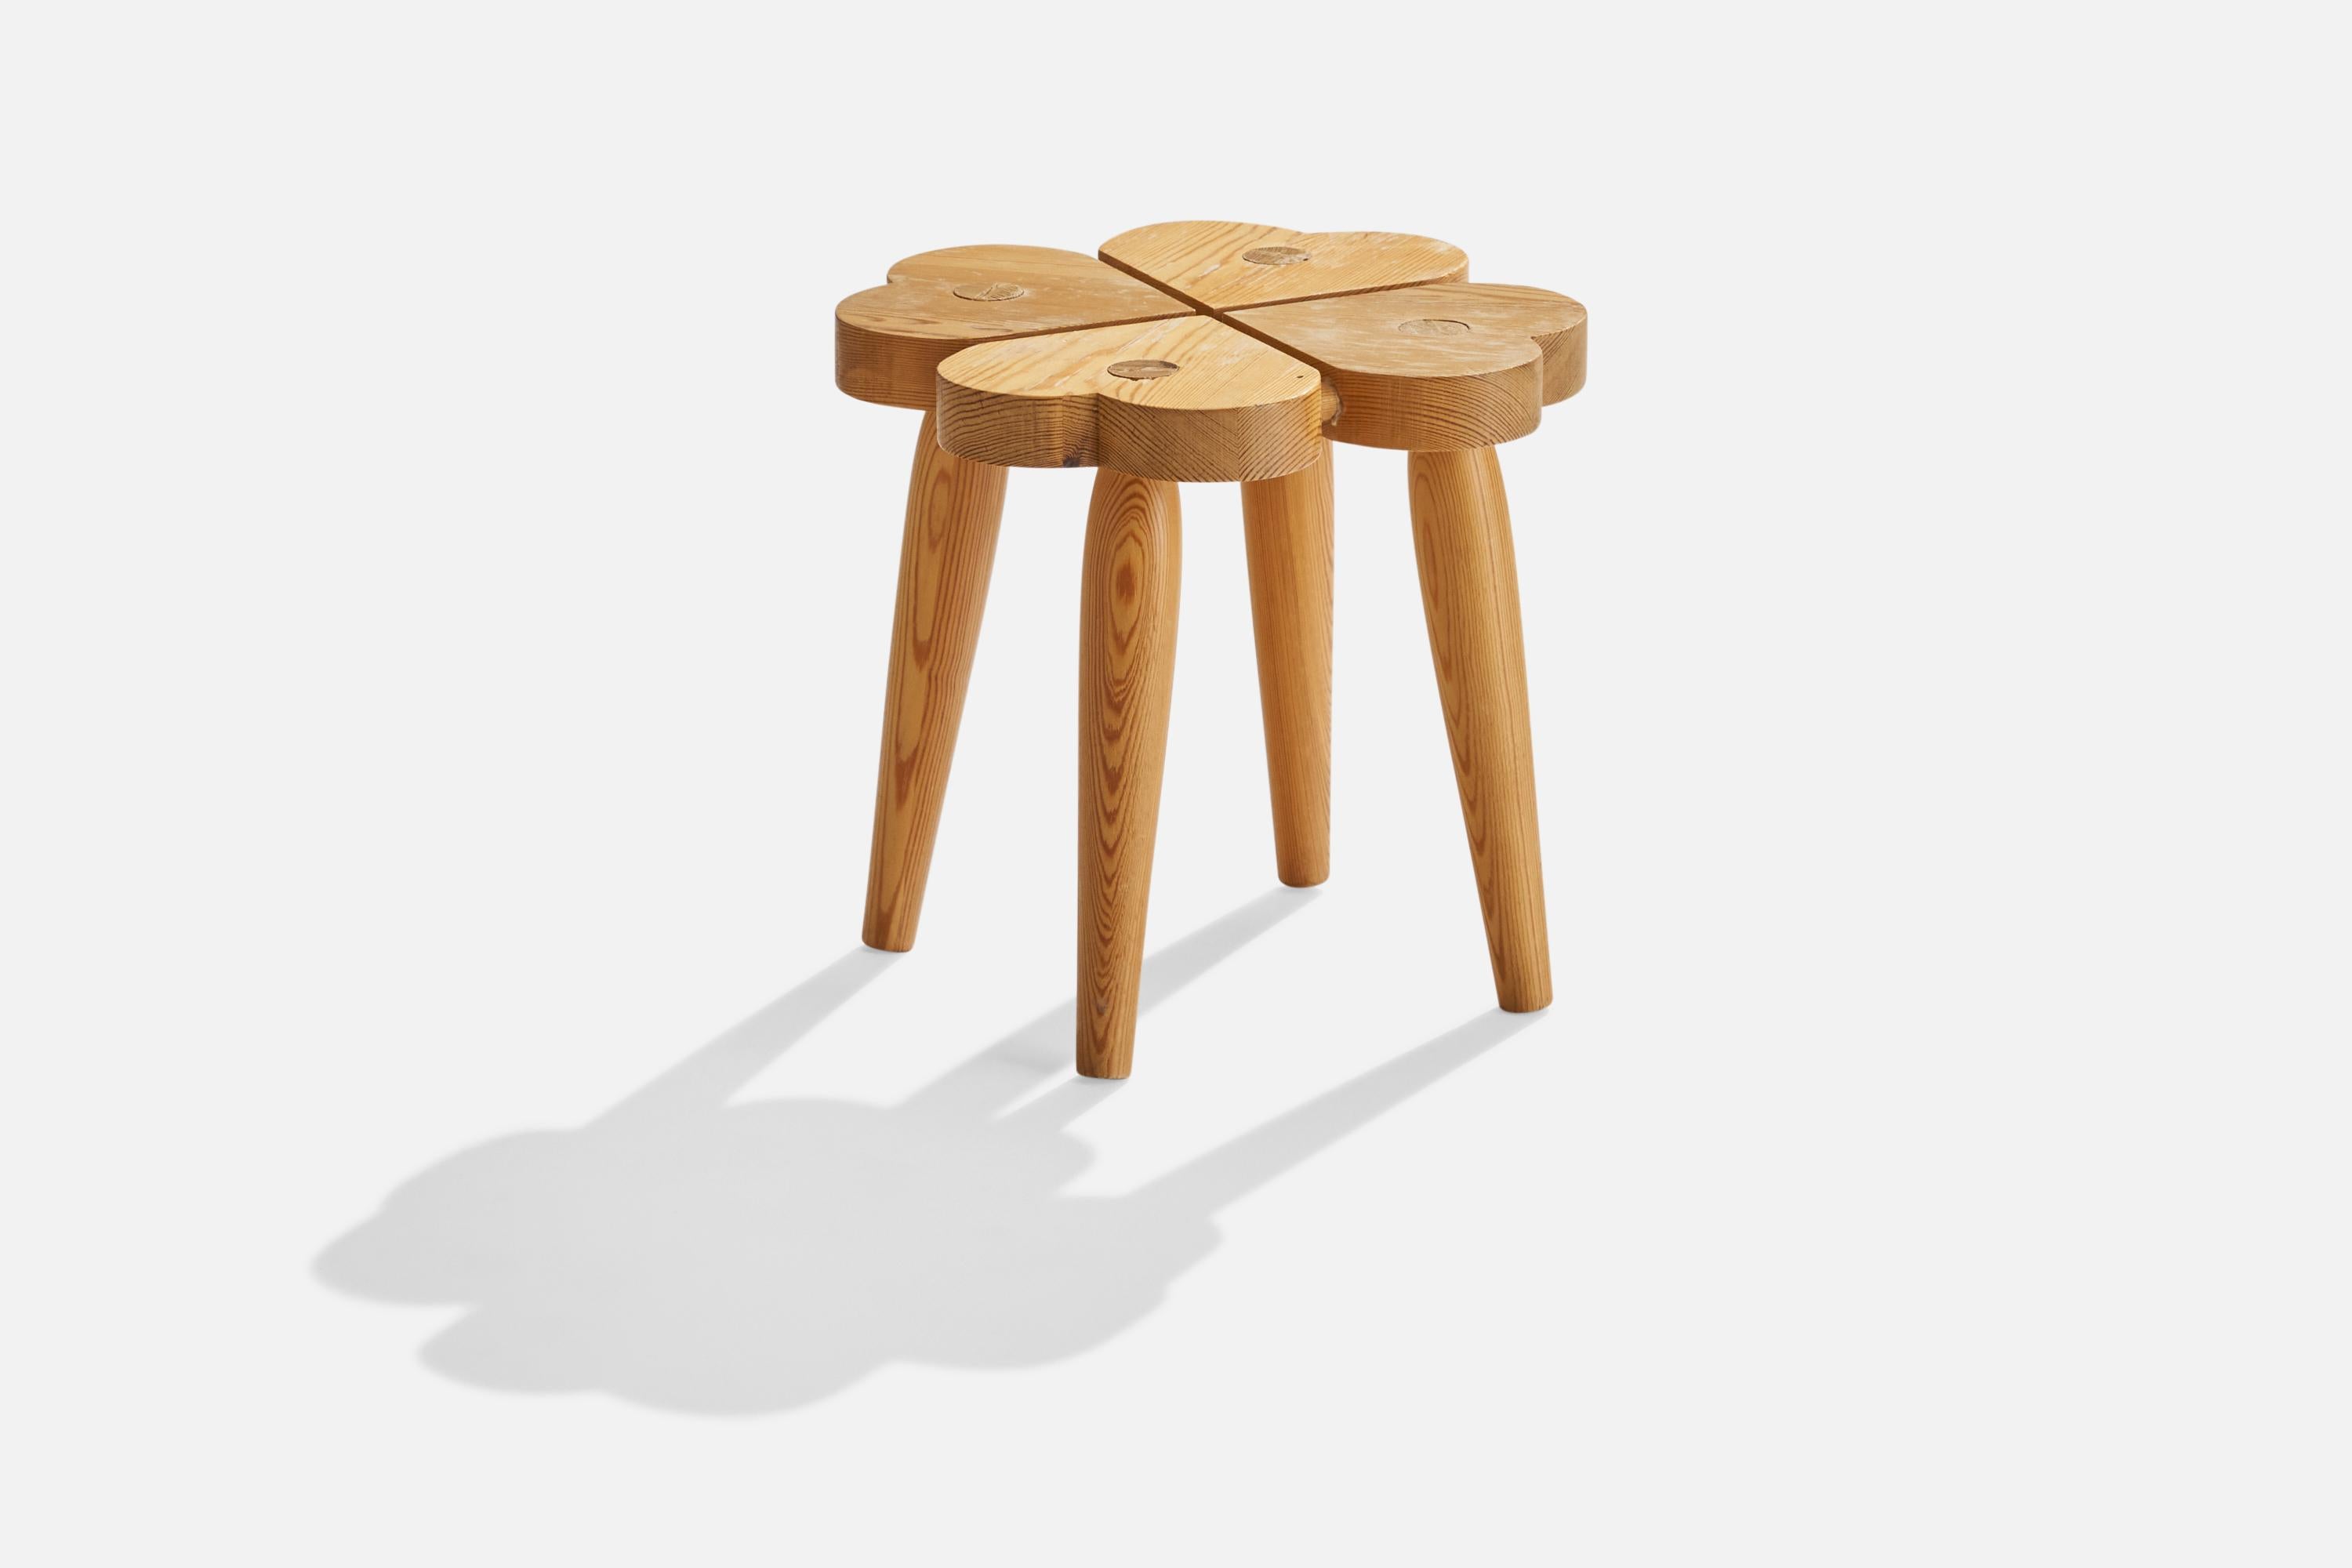 A pine stool designed and produced in Sweden, c. 1970s.

Seat height 11.75”.